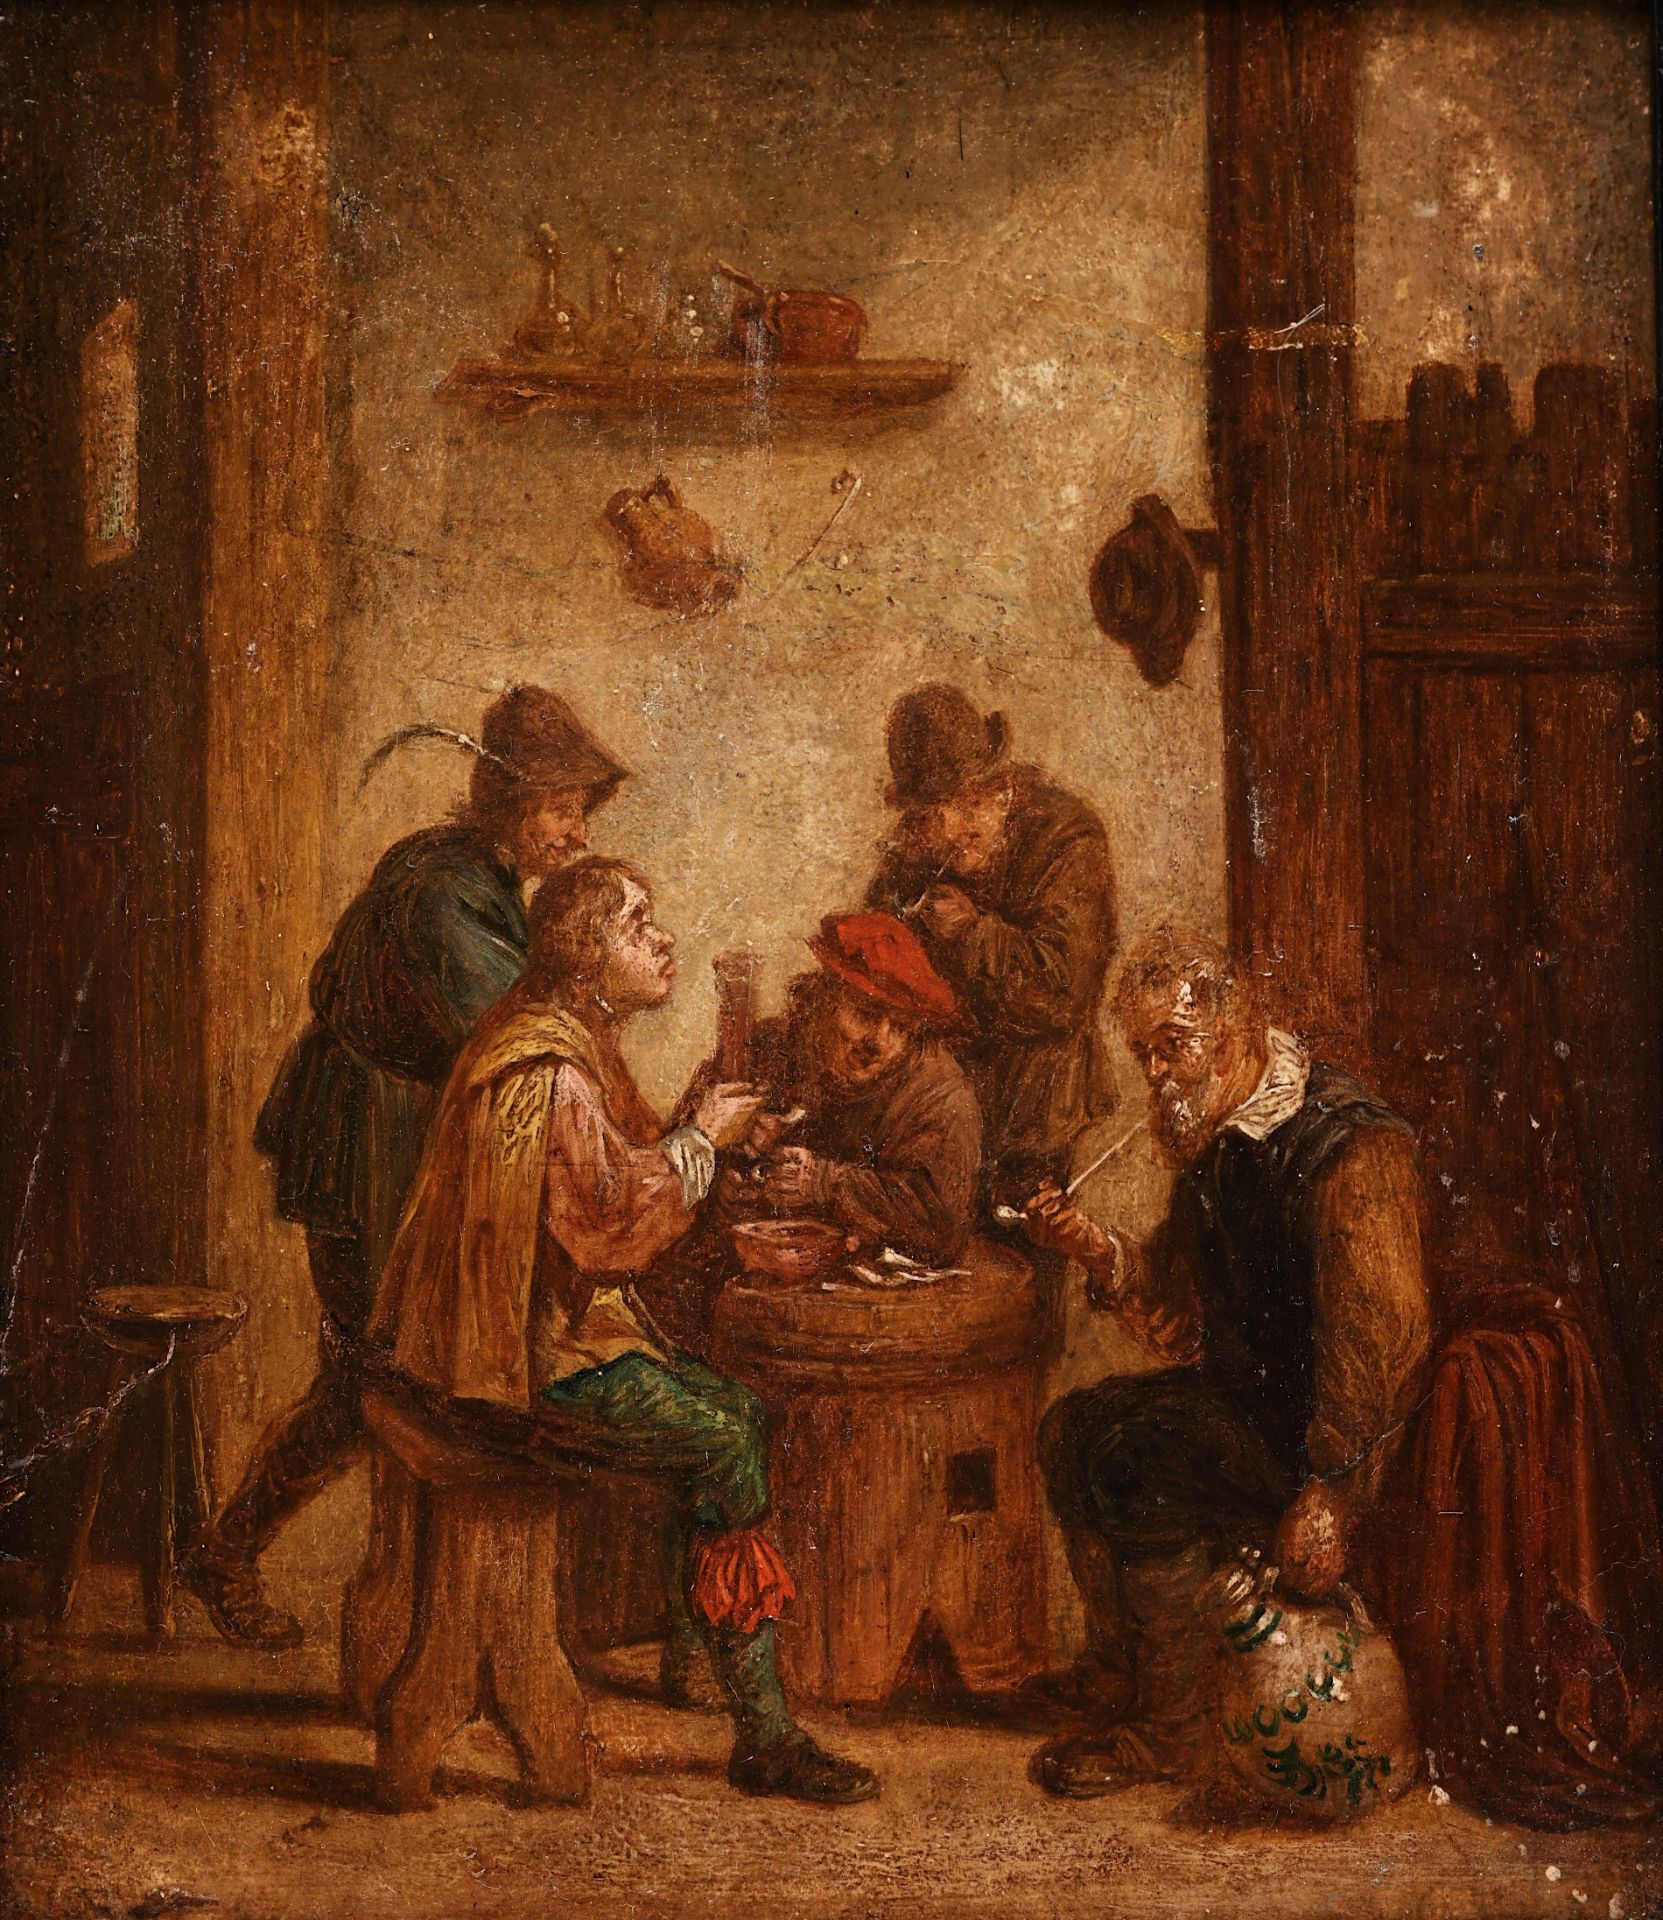 Flemish school, in the manner of David Teniers (1610-1690): Peasants making merry at an inn, oil on